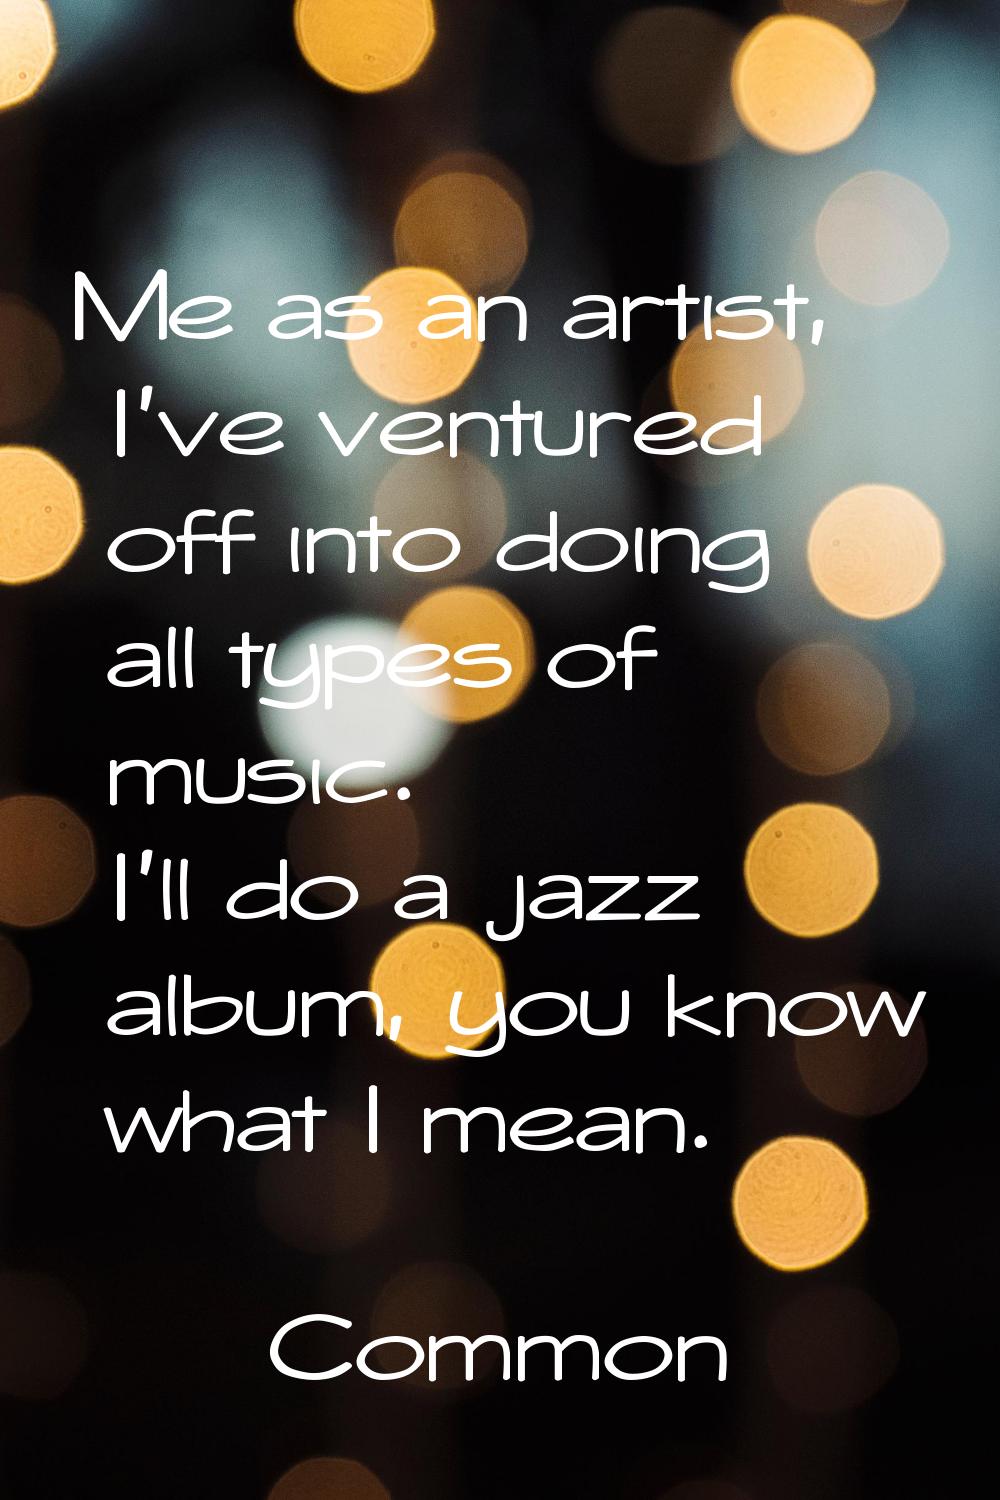 Me as an artist, I've ventured off into doing all types of music. I'll do a jazz album, you know wh